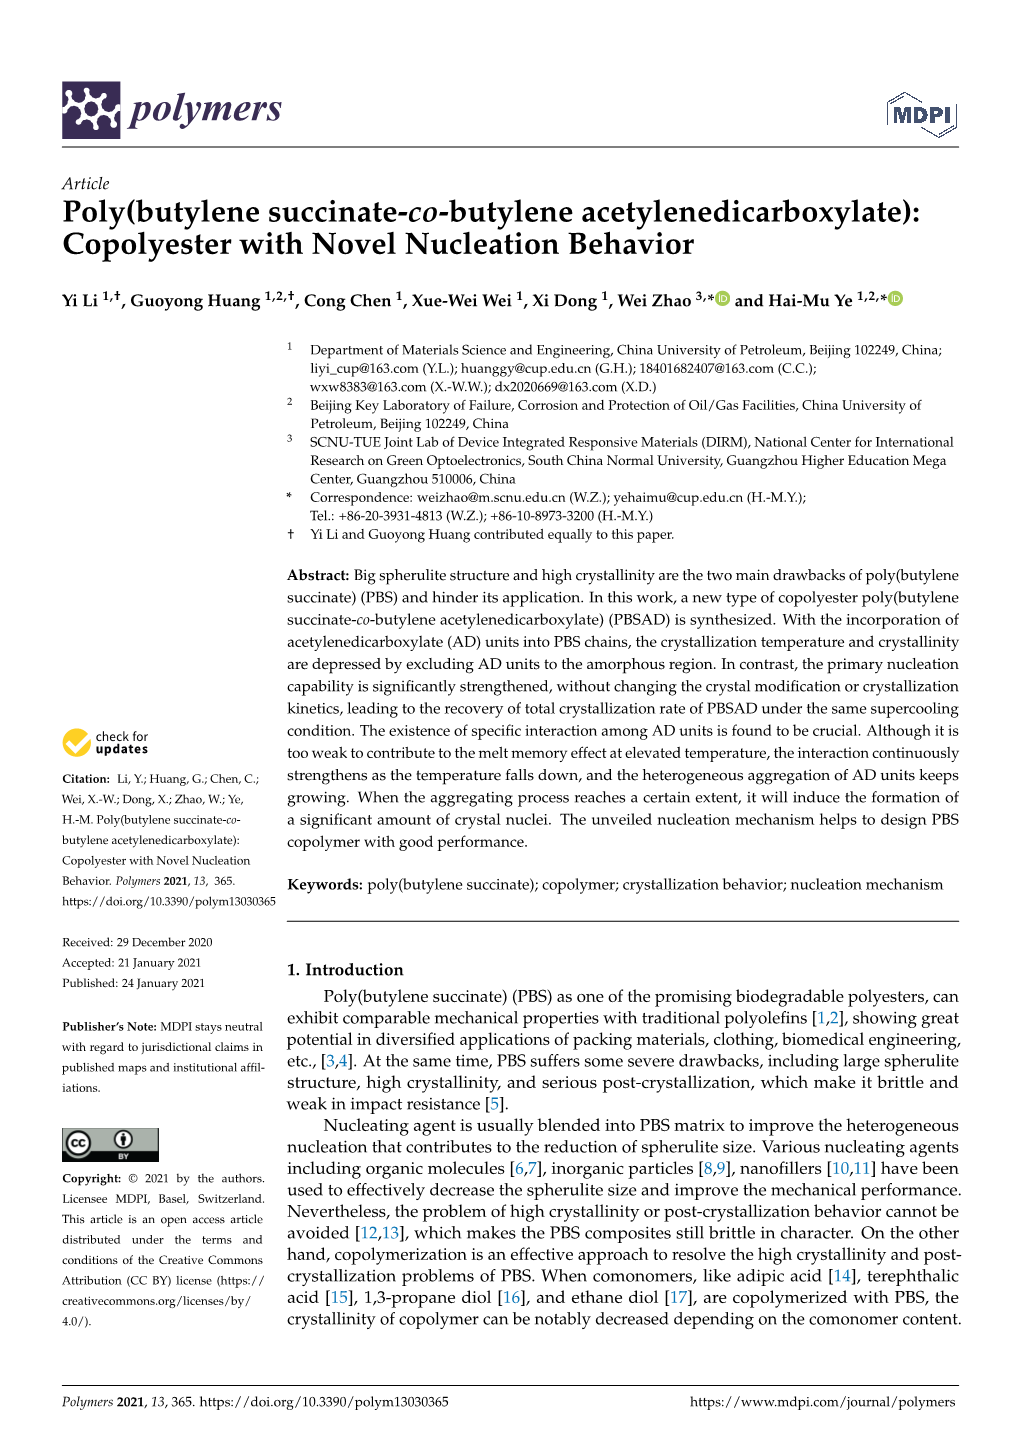 Poly(Butylene Succinate-Co-Butylene Acetylenedicarboxylate): Copolyester with Novel Nucleation Behavior